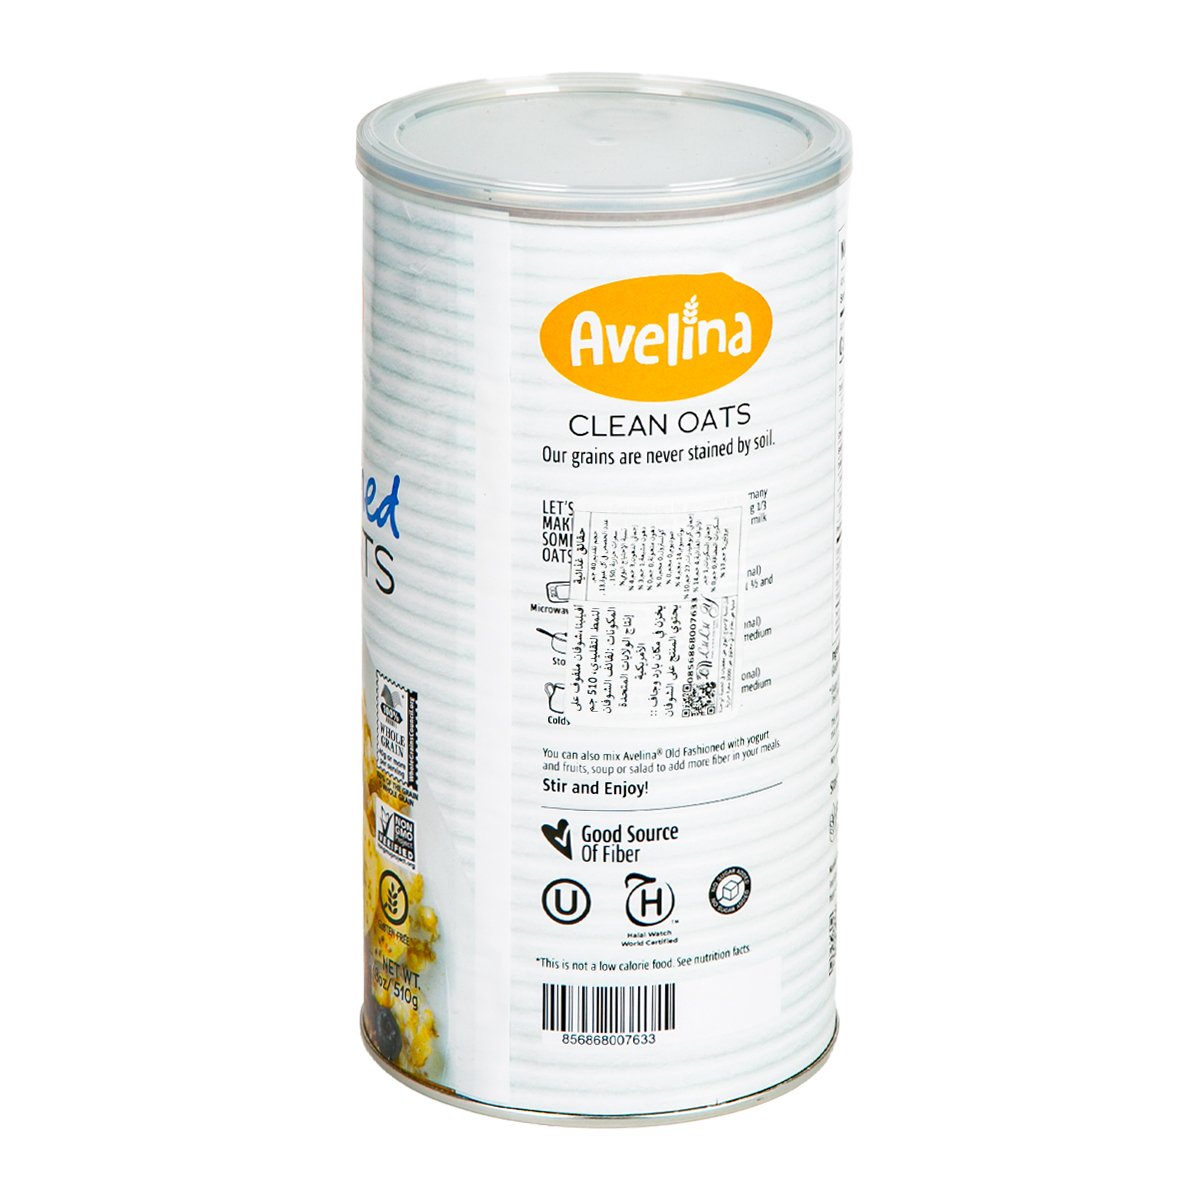 Avelina Old Fashioned Rolled Oats 510 g